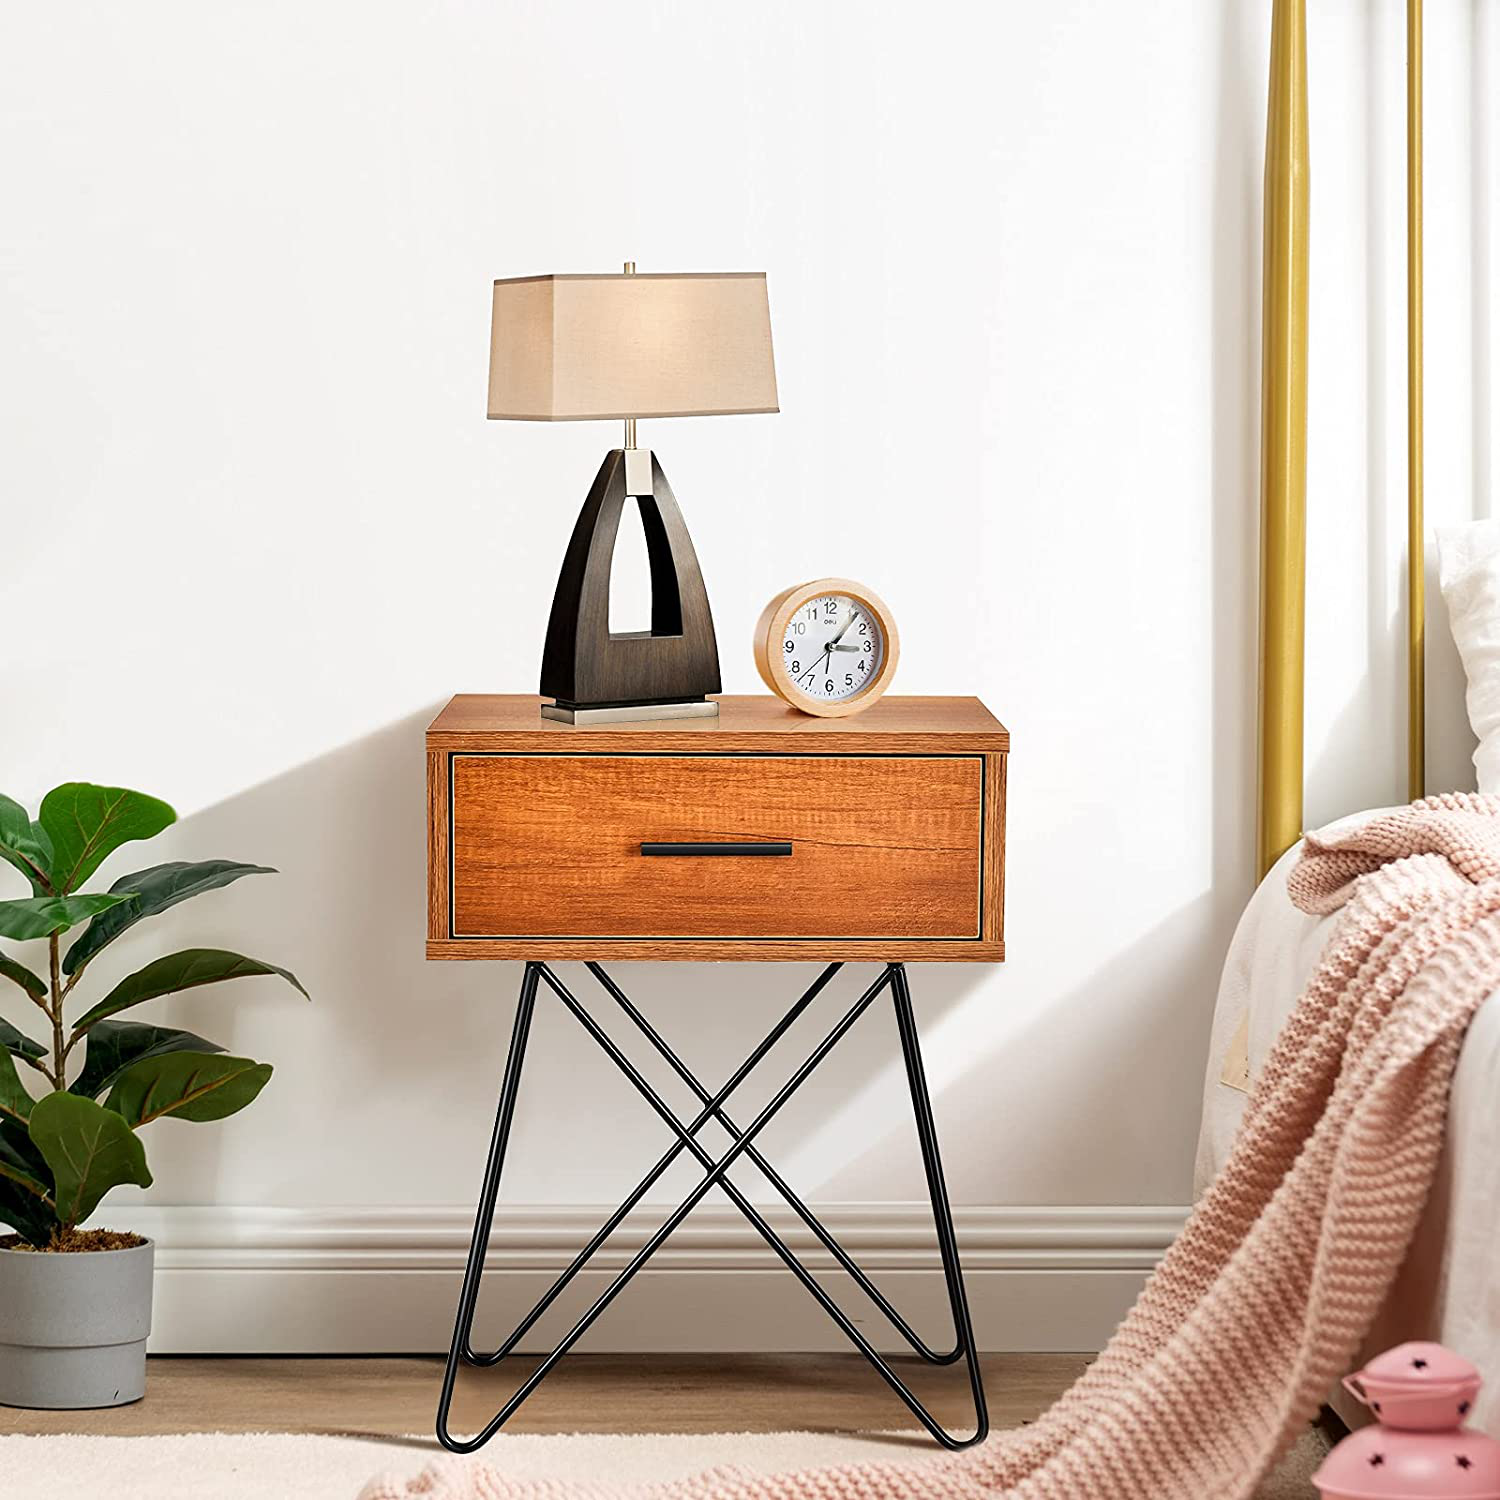 Hudson Industrial Wooden Side Table with Drawer